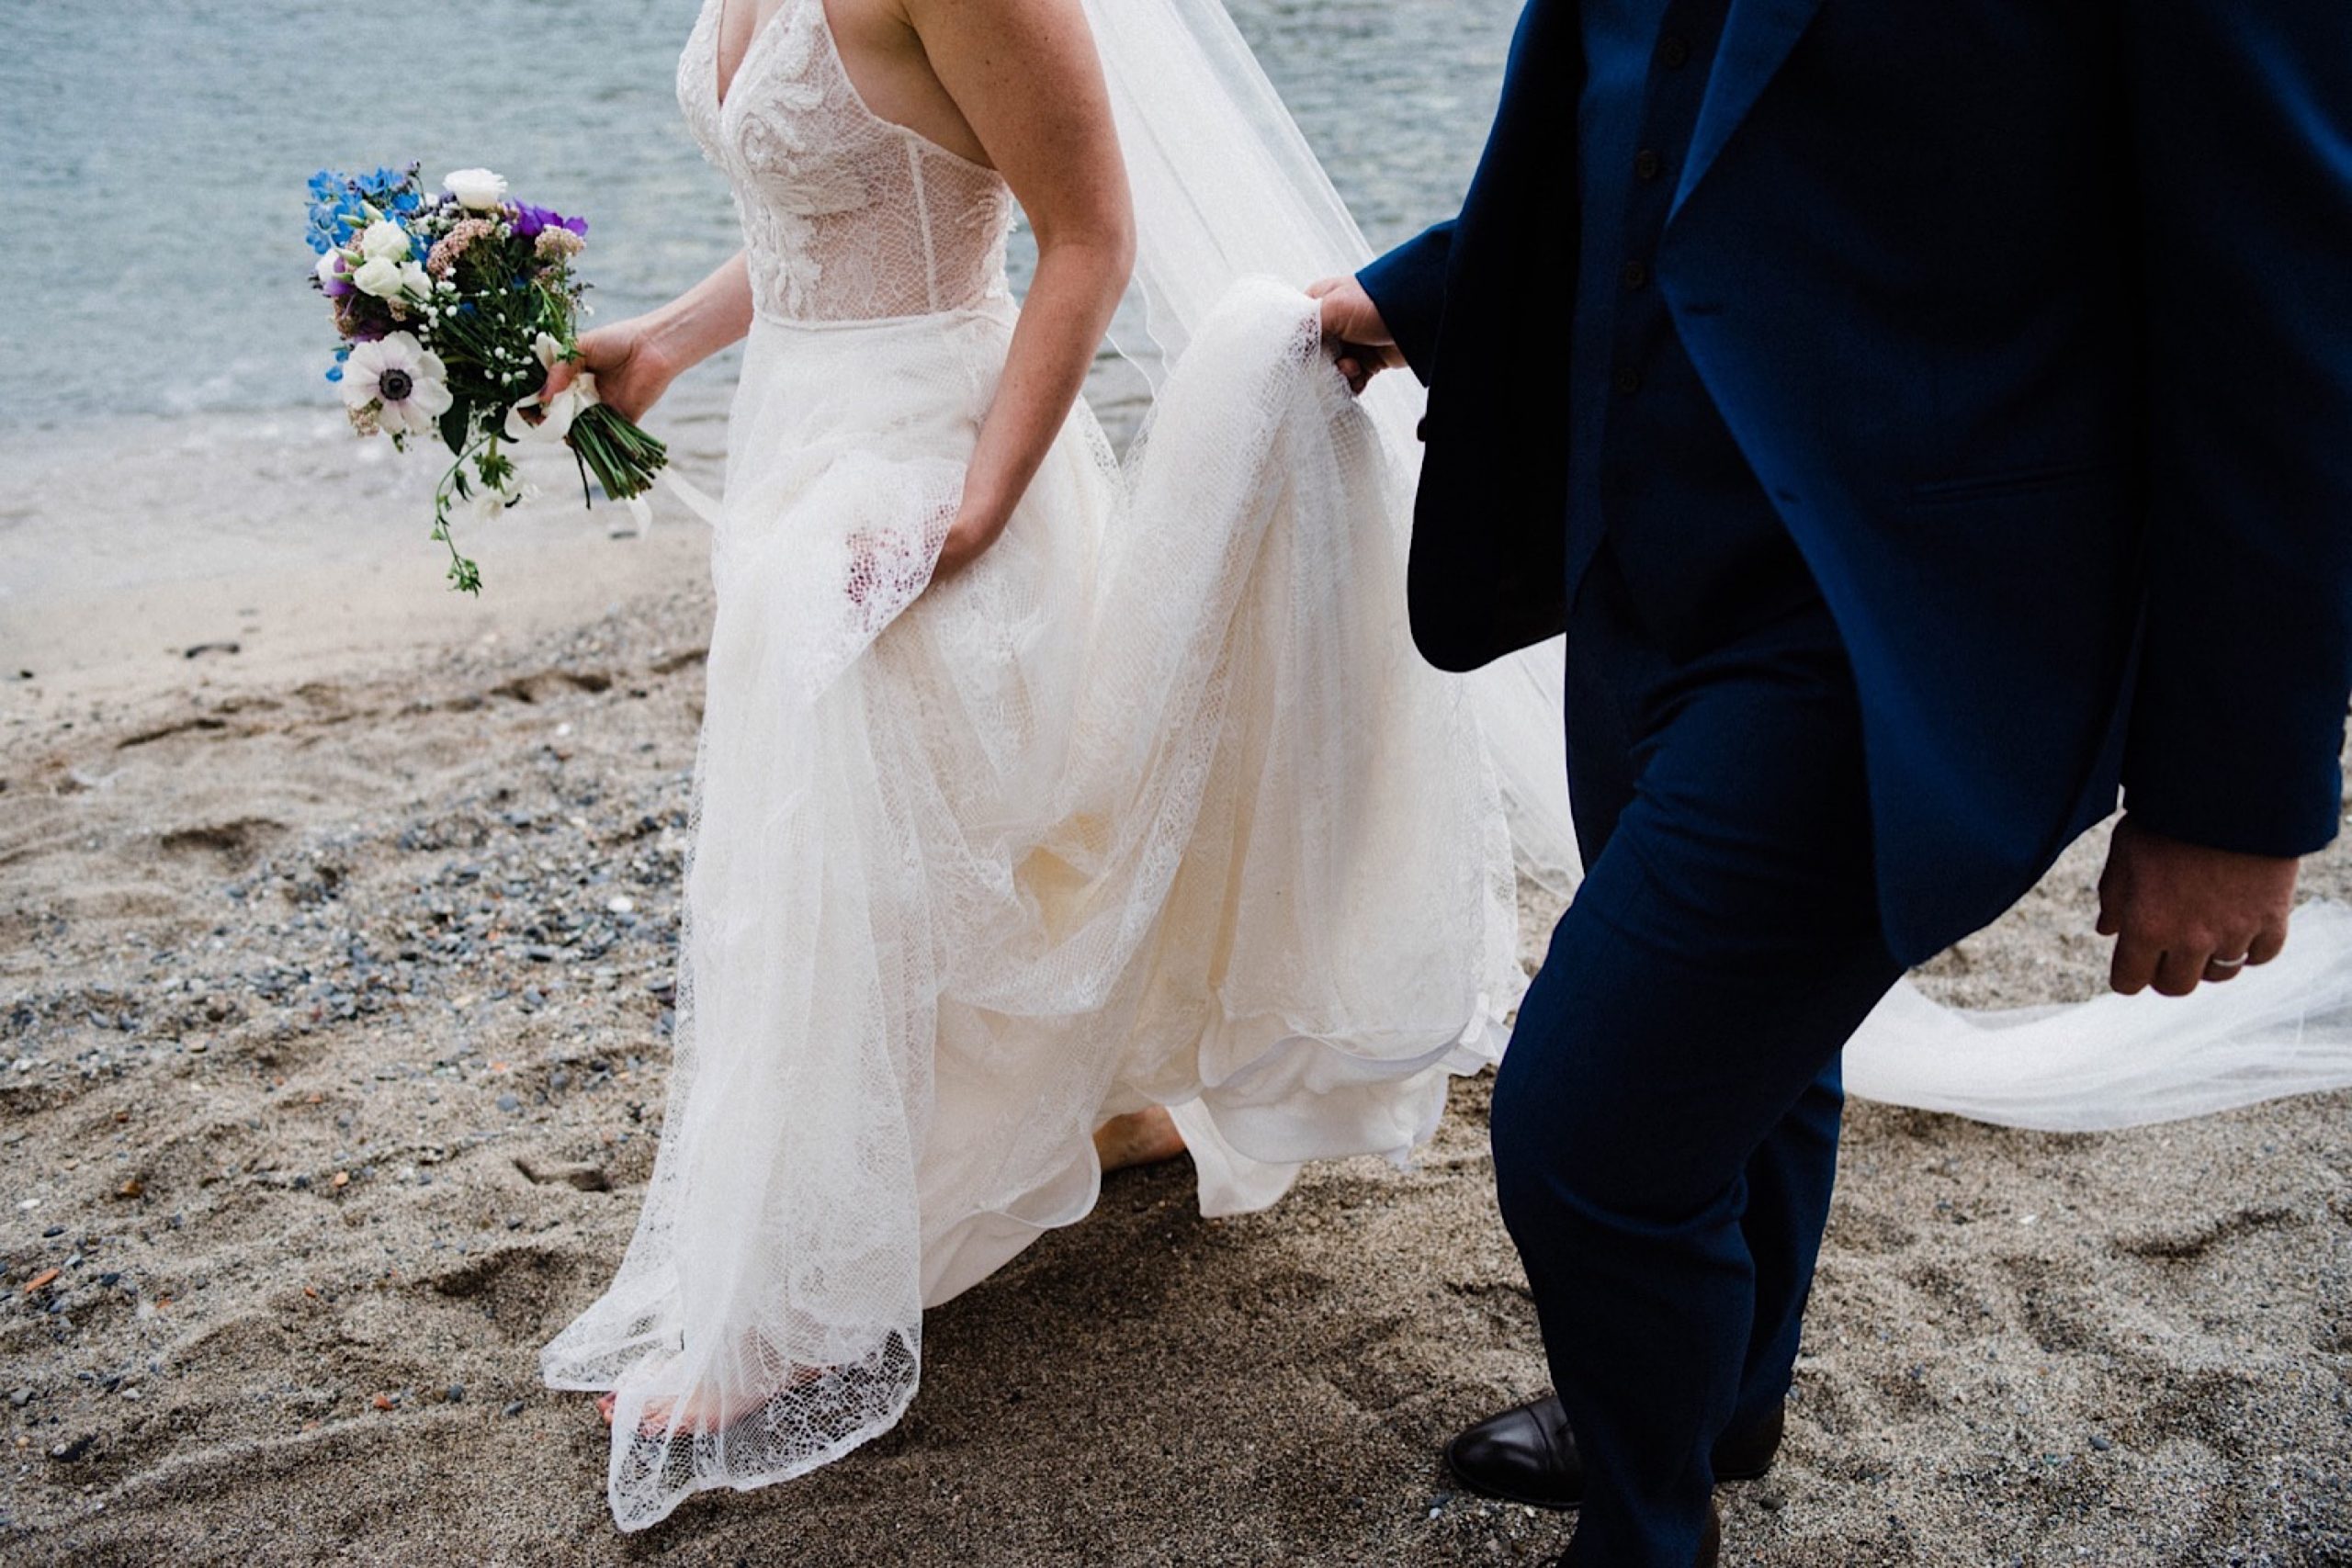 Natural Destination Wedding Photography in Italy of the bride & groom walking together.